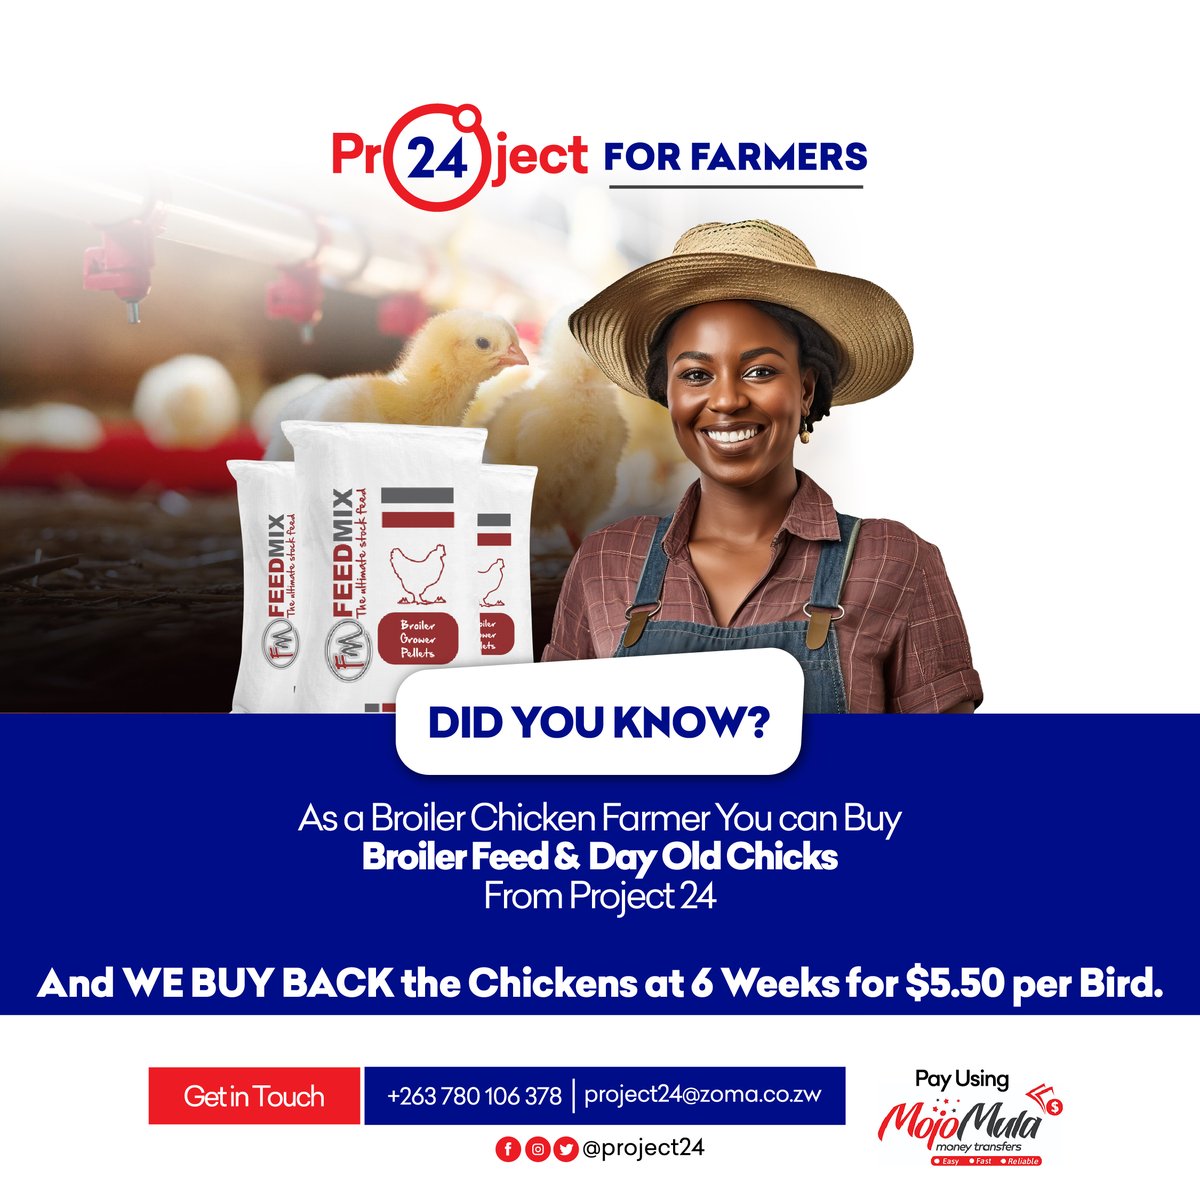 Attention Broiler Farmers! Get all your needs fulfilled at Project 24! Purchase your feeds and day-old chicks conveniently, and guess what? We'll buy back your chickens at 6 weeks for $5.50 each! Payments accepted at all Mojomula outlets nationwide.